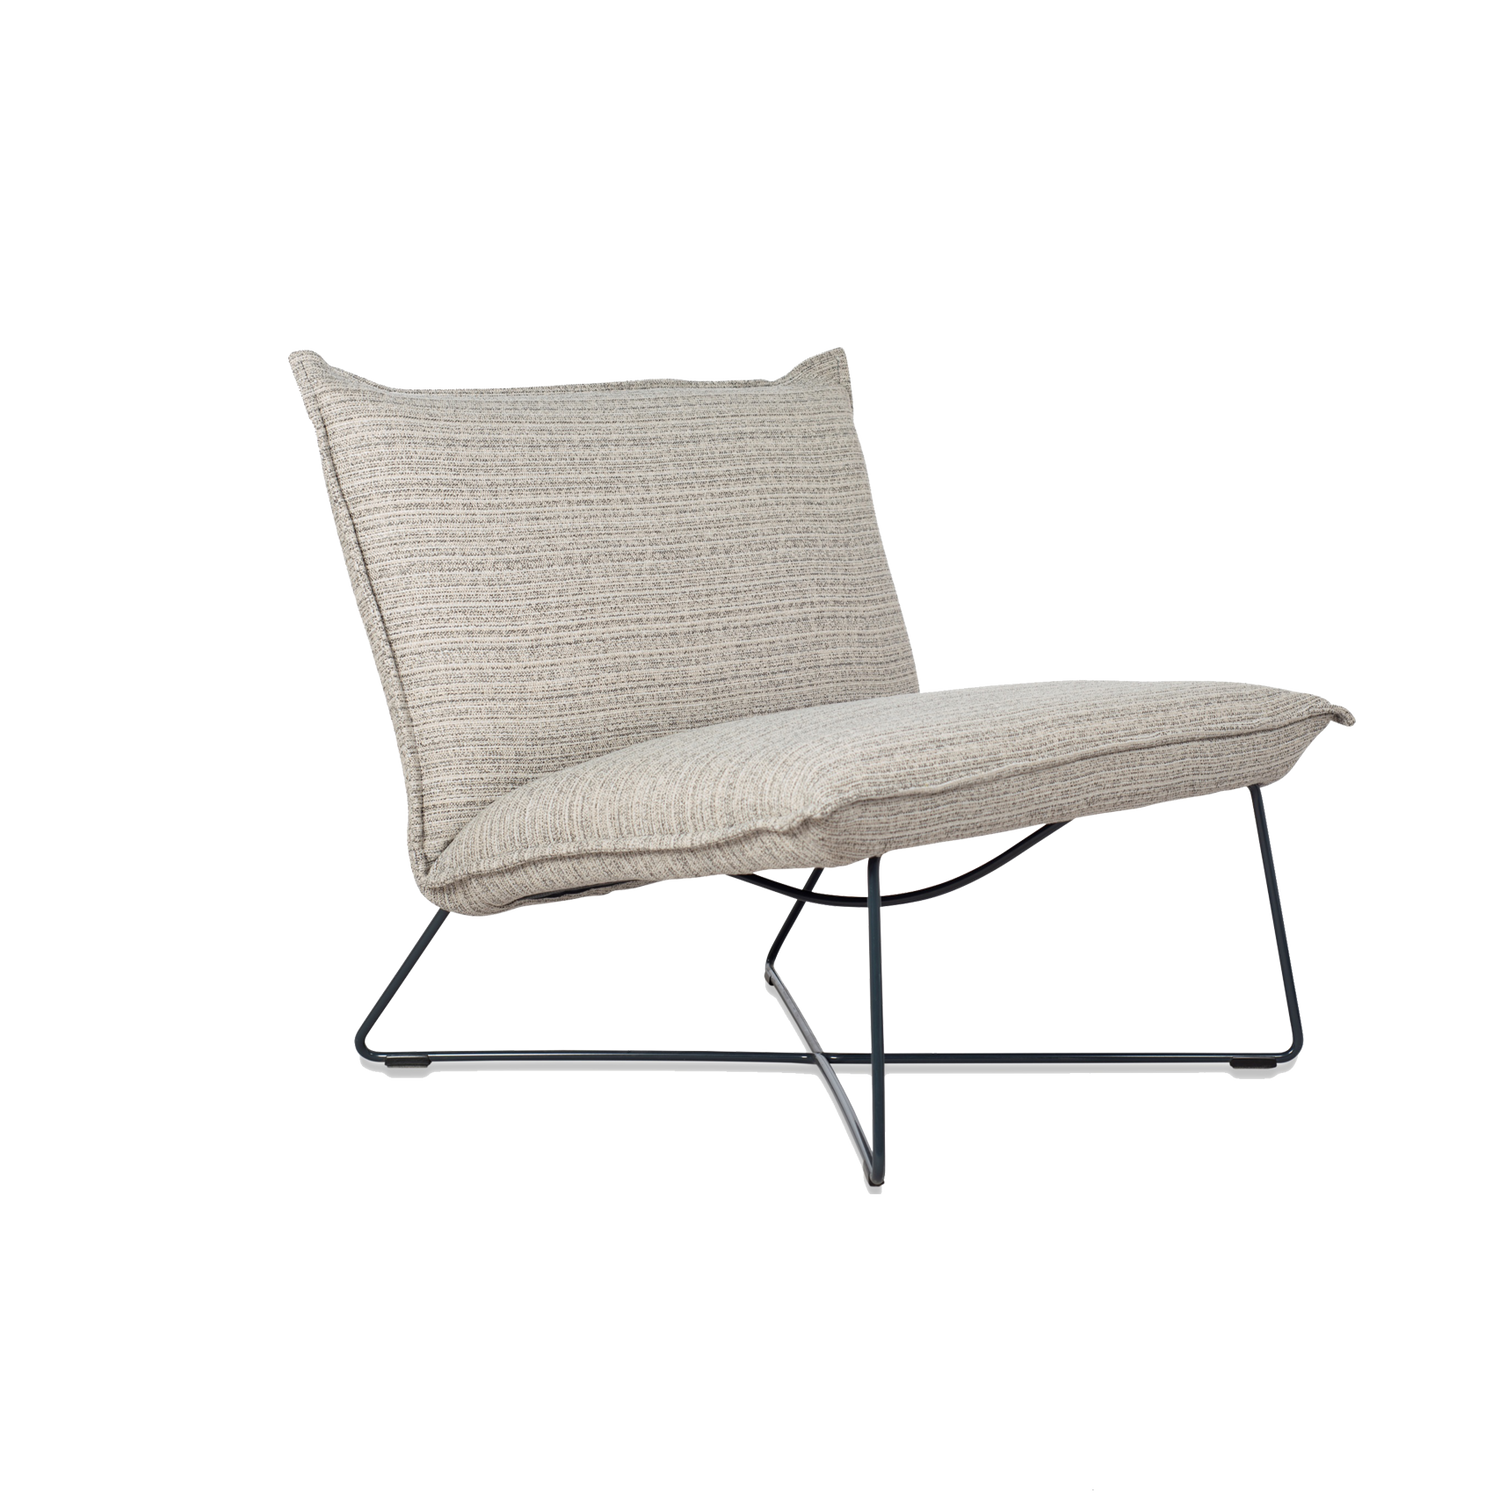 Earl Lounge Chair Low Outdoor. | All-in-Line.com